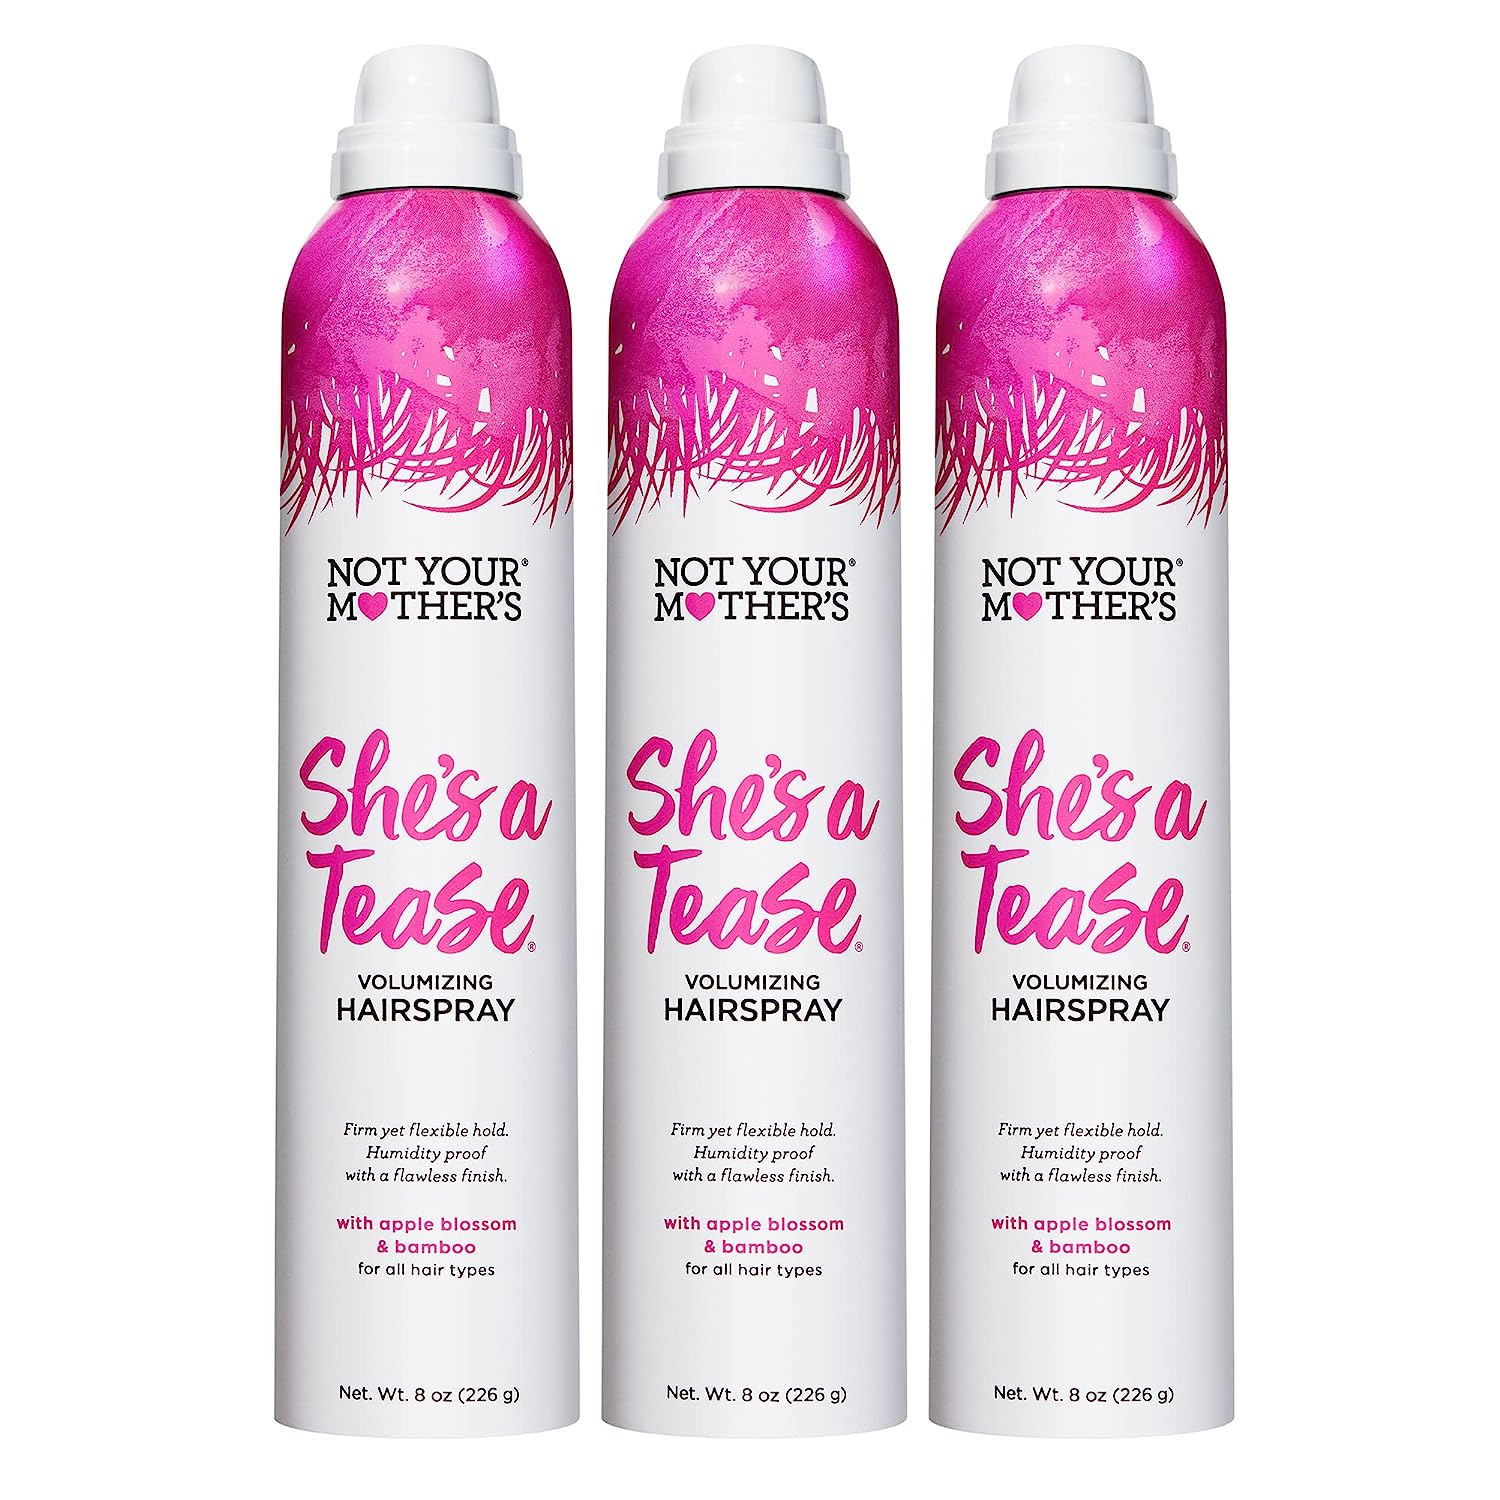 Not Your Mother's She's a Tease Hairspray (3-Pack) - 8 [...]